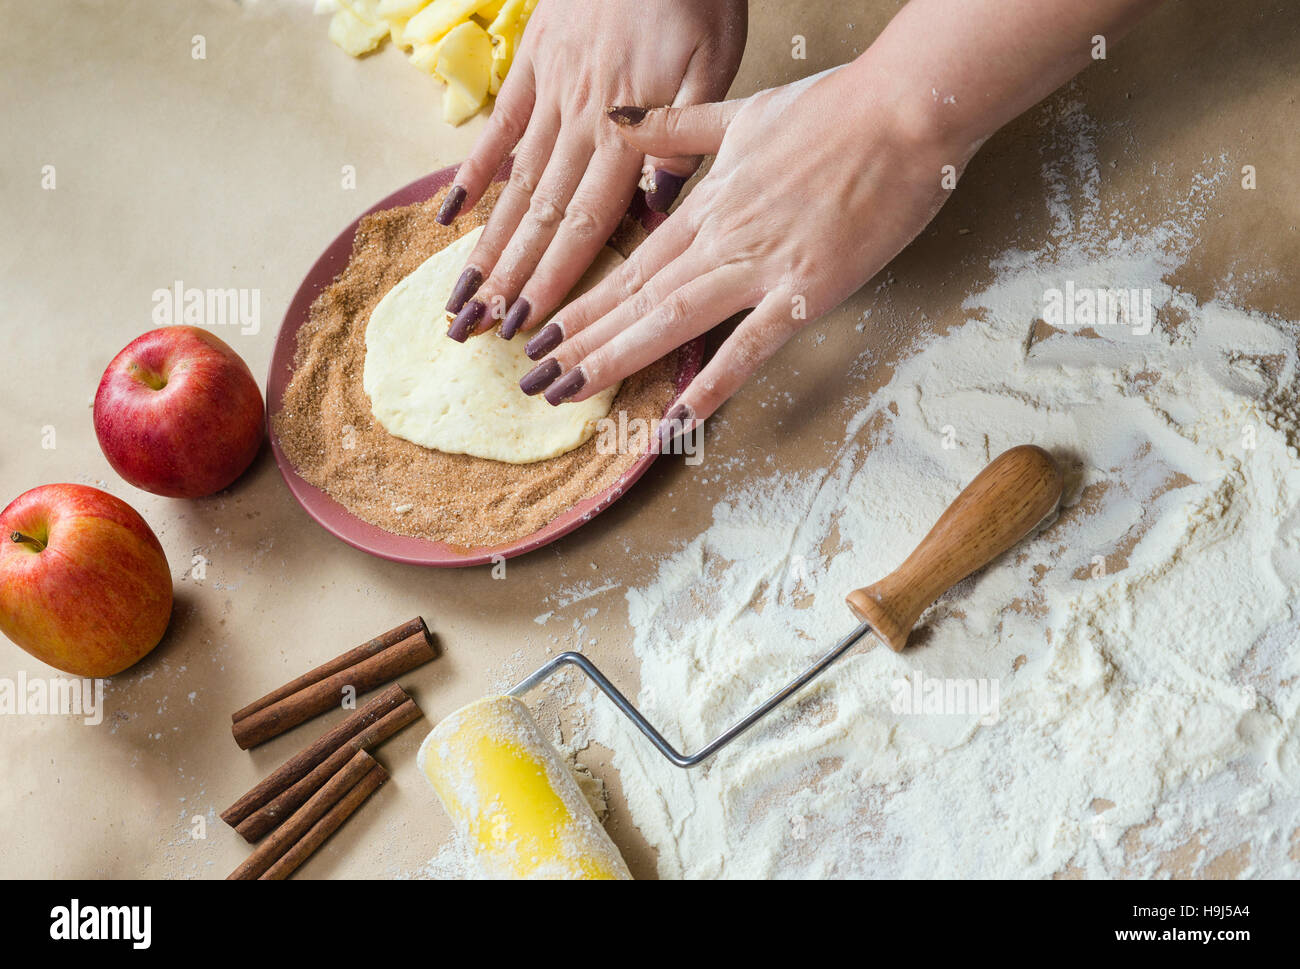 Preparation Cookies With Cinnamon Cottage Cheese And Apples On